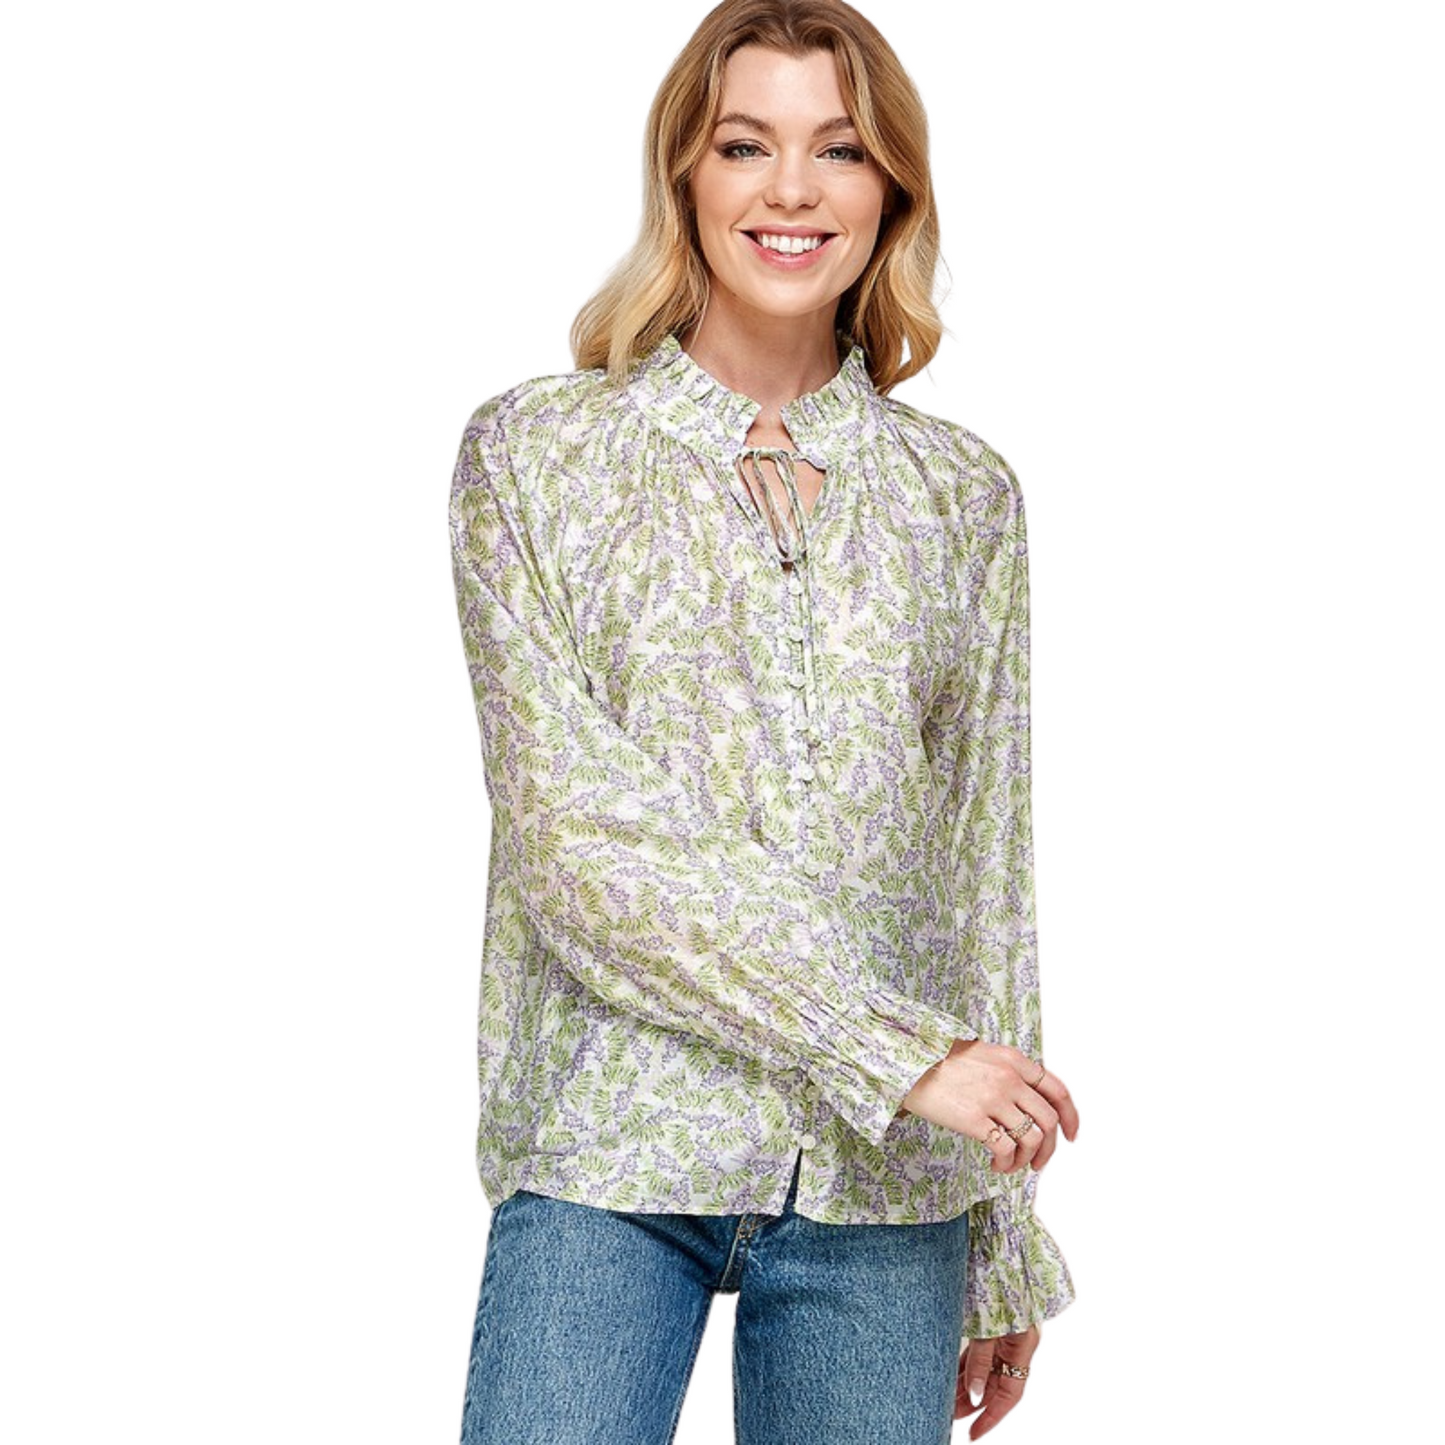 This Floral Print Satin Top is perfect for any occasion! It features a tie top and long sleeves for a secure, comfortable fit. Lightweight fabric makes it a great choice for any season. Perfect for the fashion-forward woman!